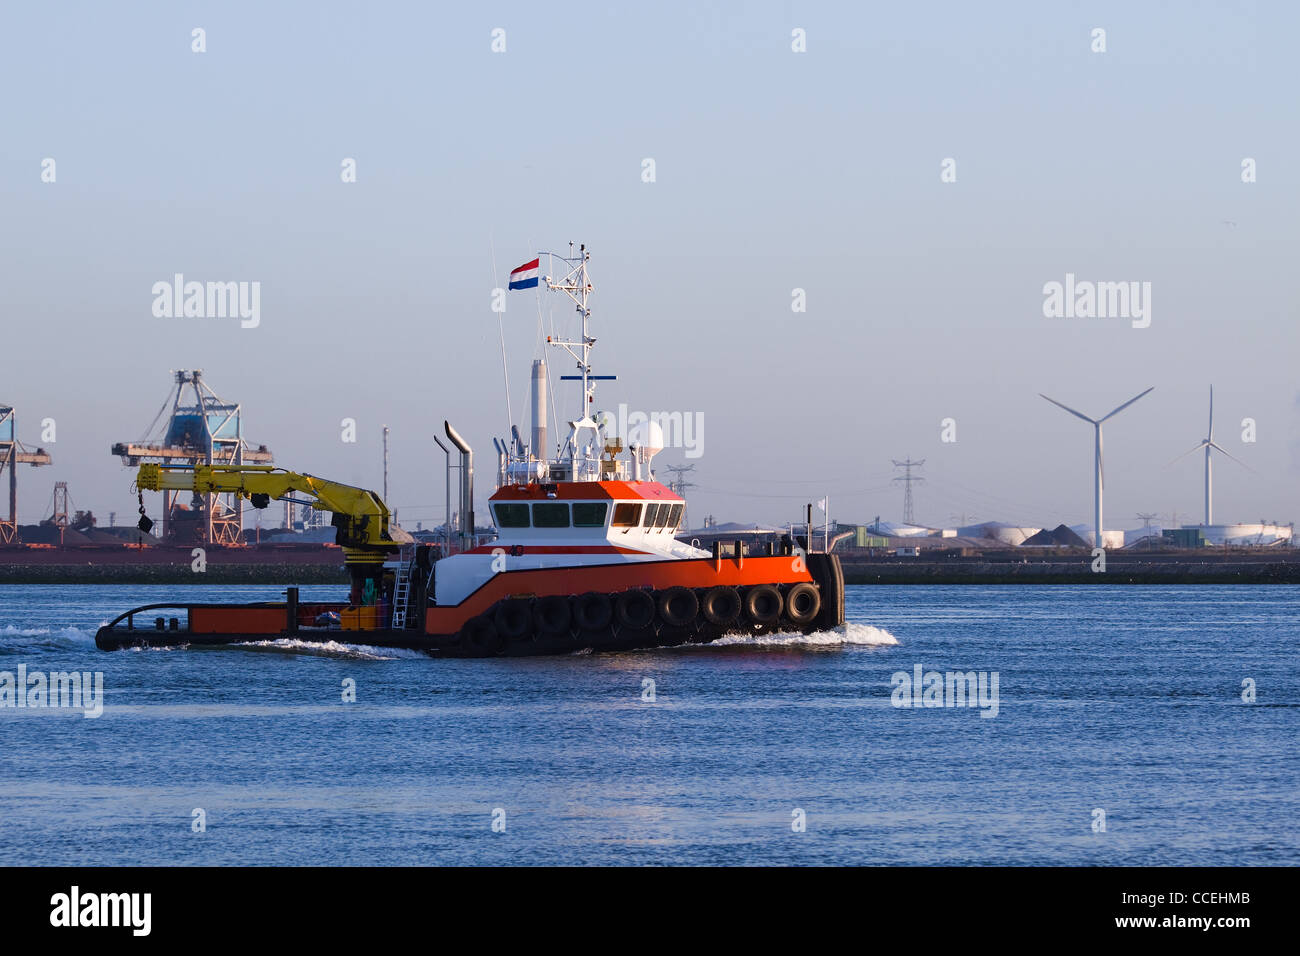 Tugboat with crane passing by on the river in evening light - industrial background Stock Photo